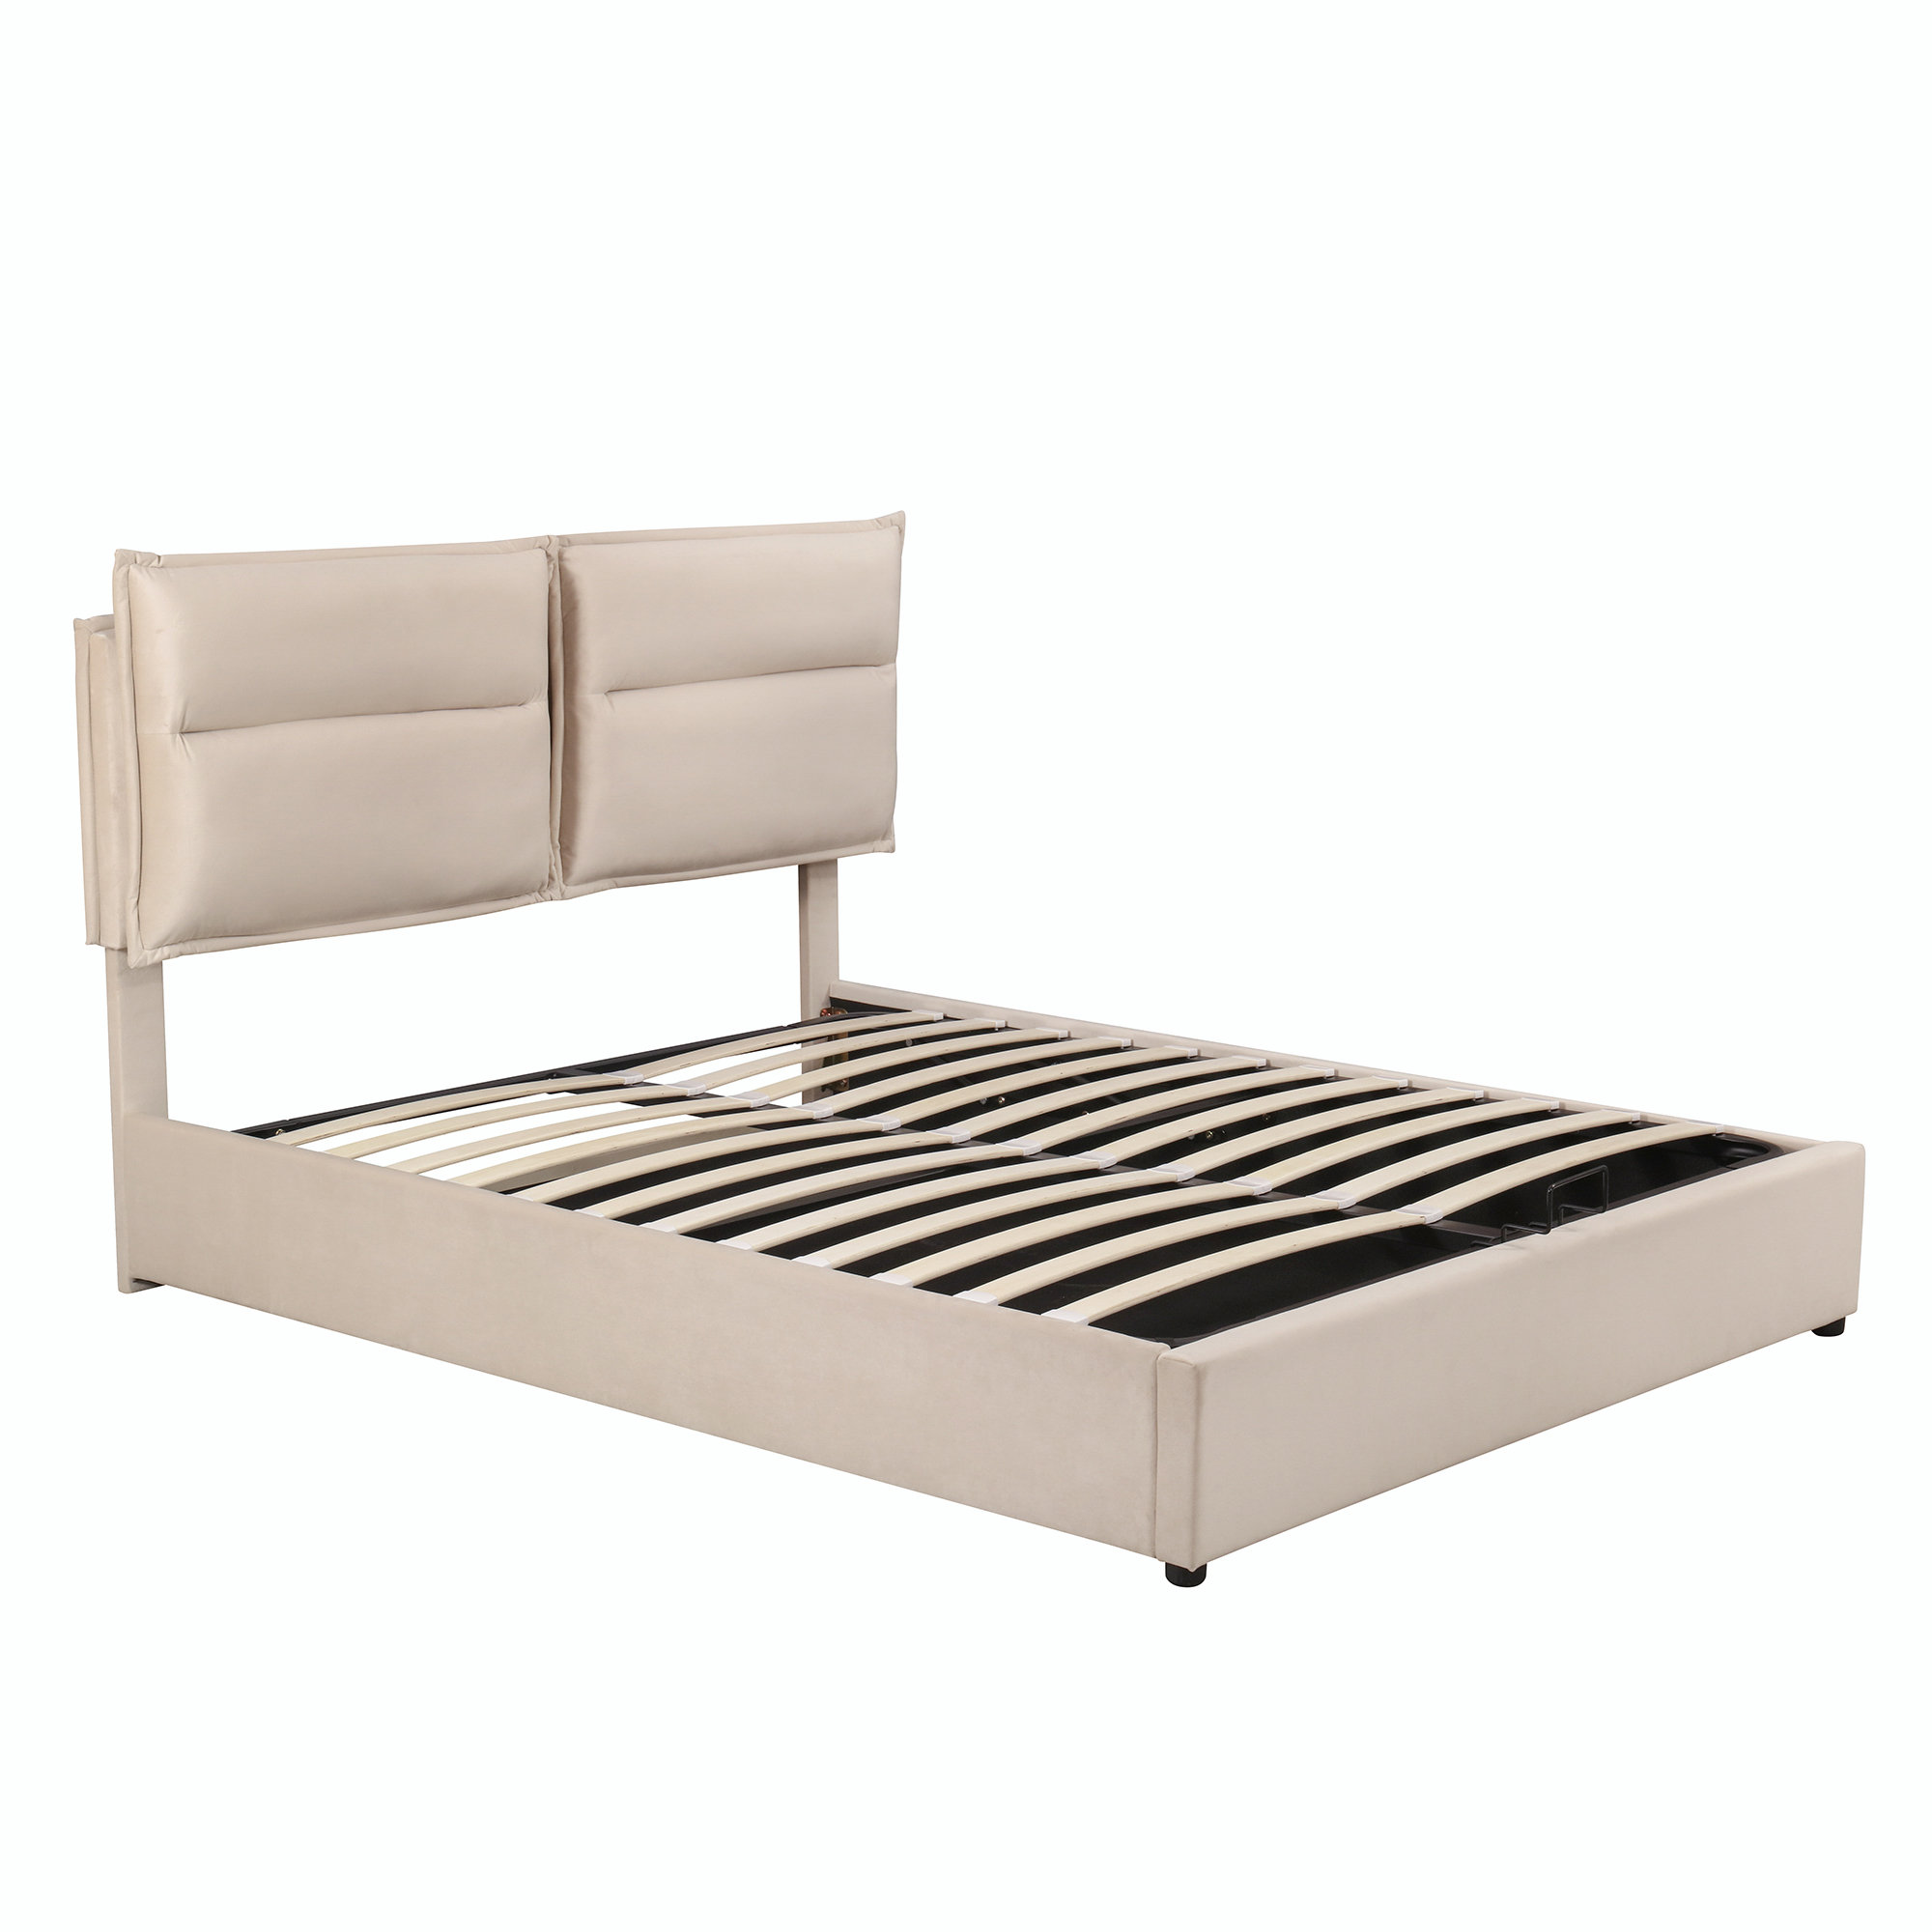 Ebern Designs Ammelie Upholstered Platform Bed with a Hydraulic Storage ...